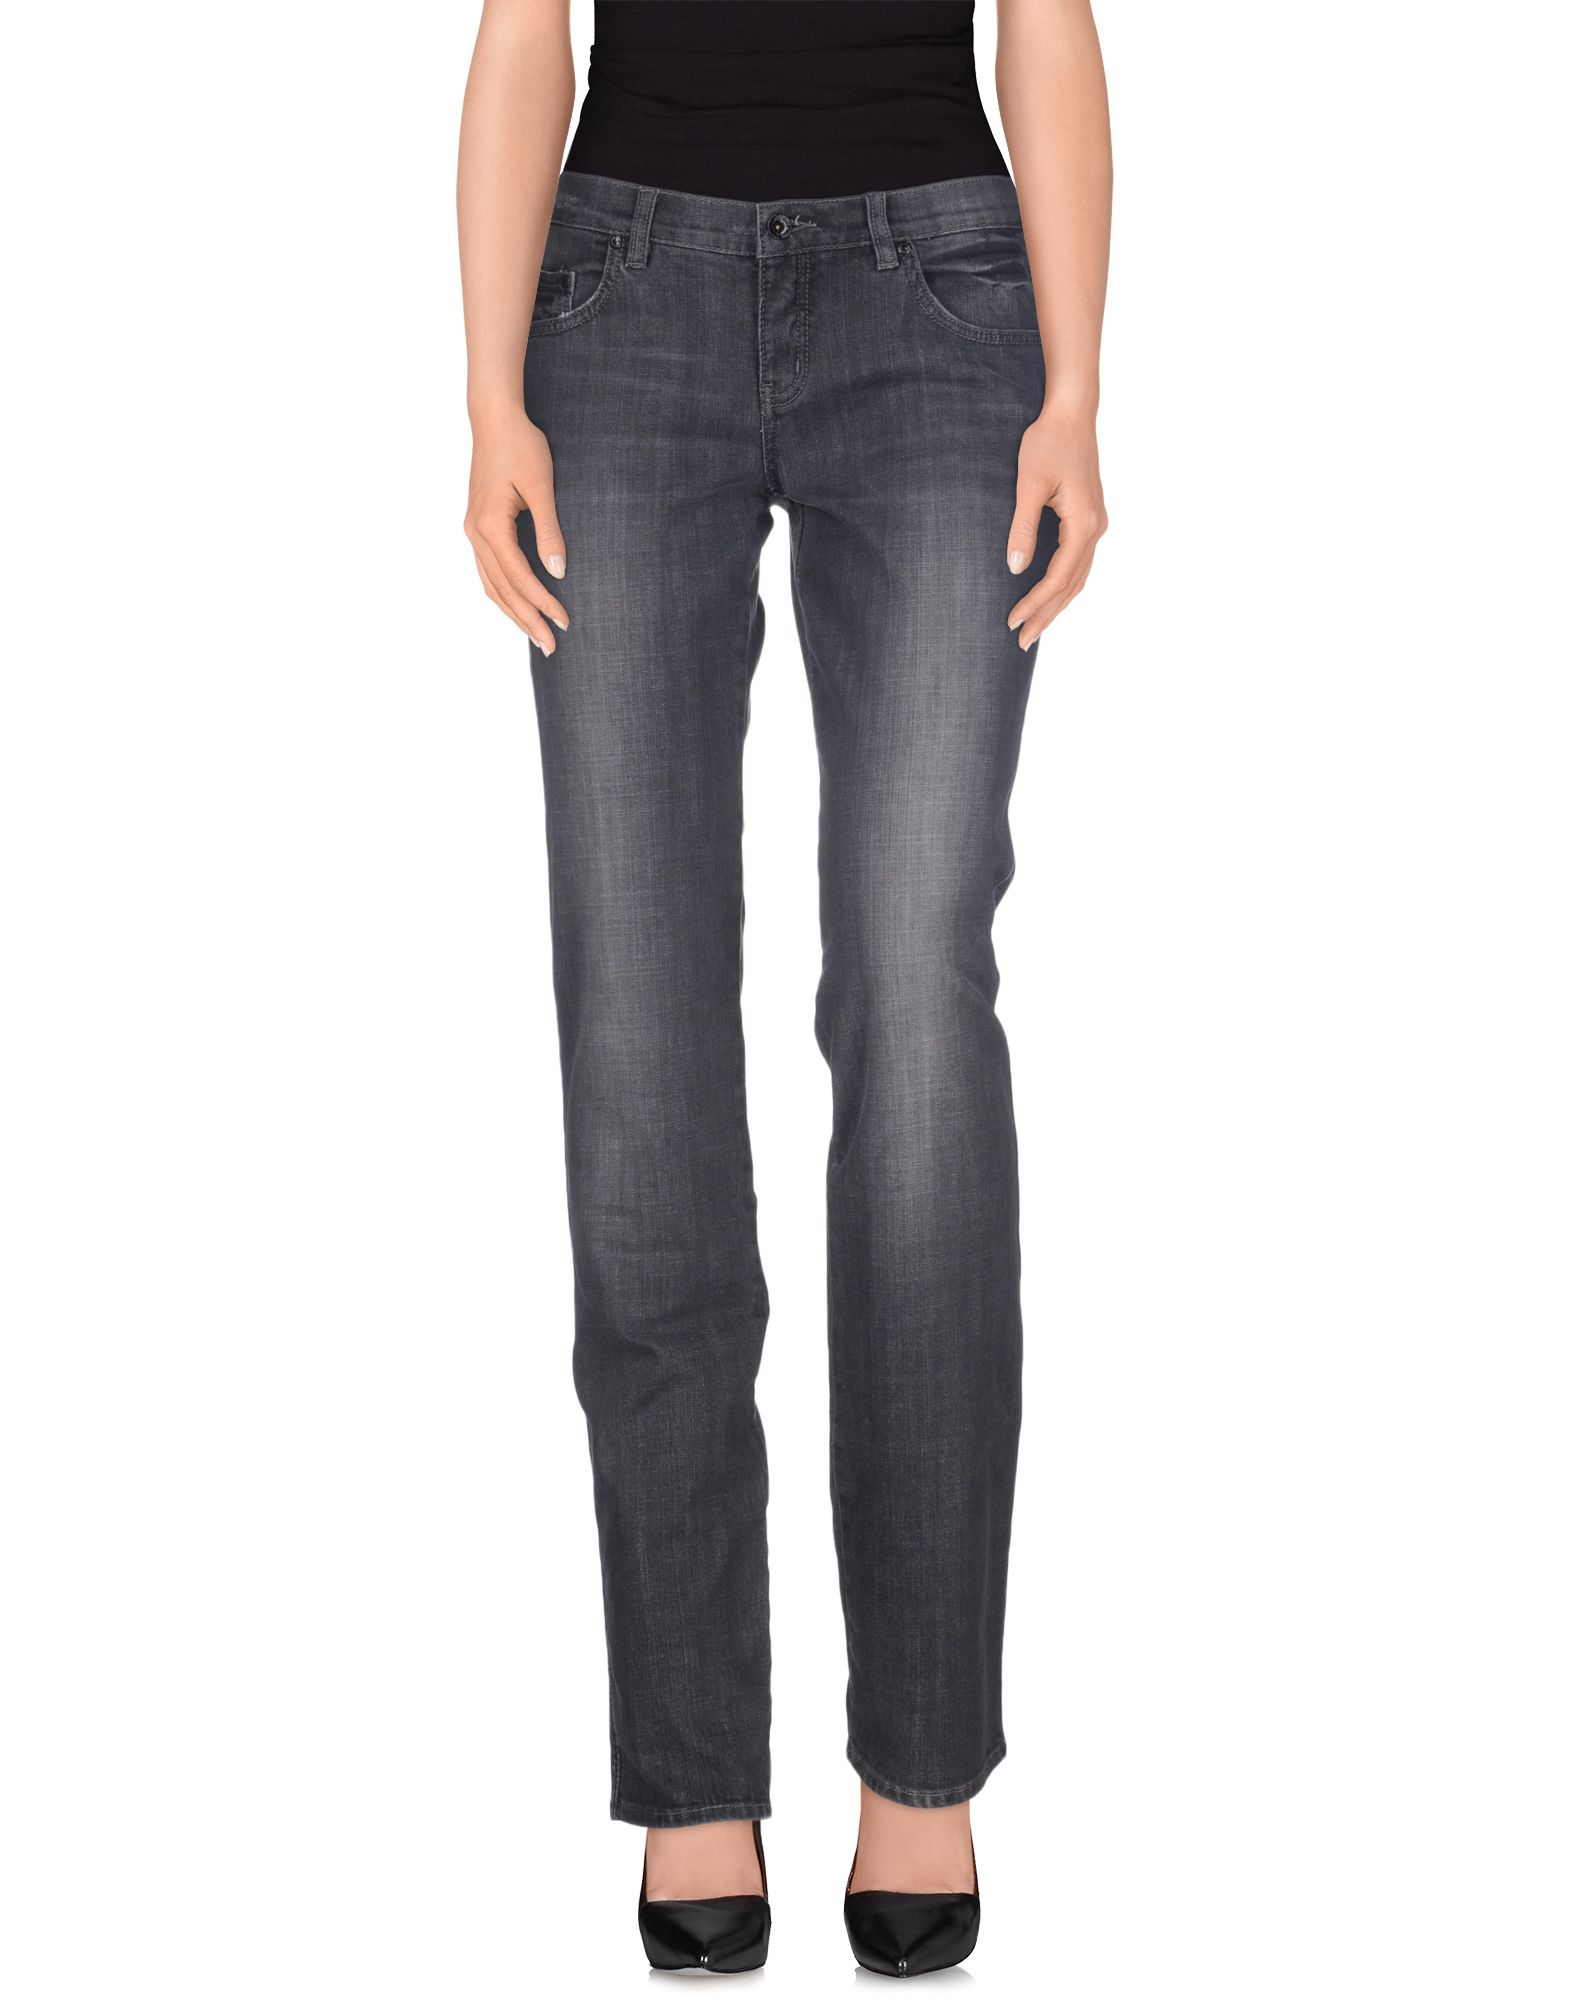 Lyst - Moschino Jeans Denim Trousers in Gray